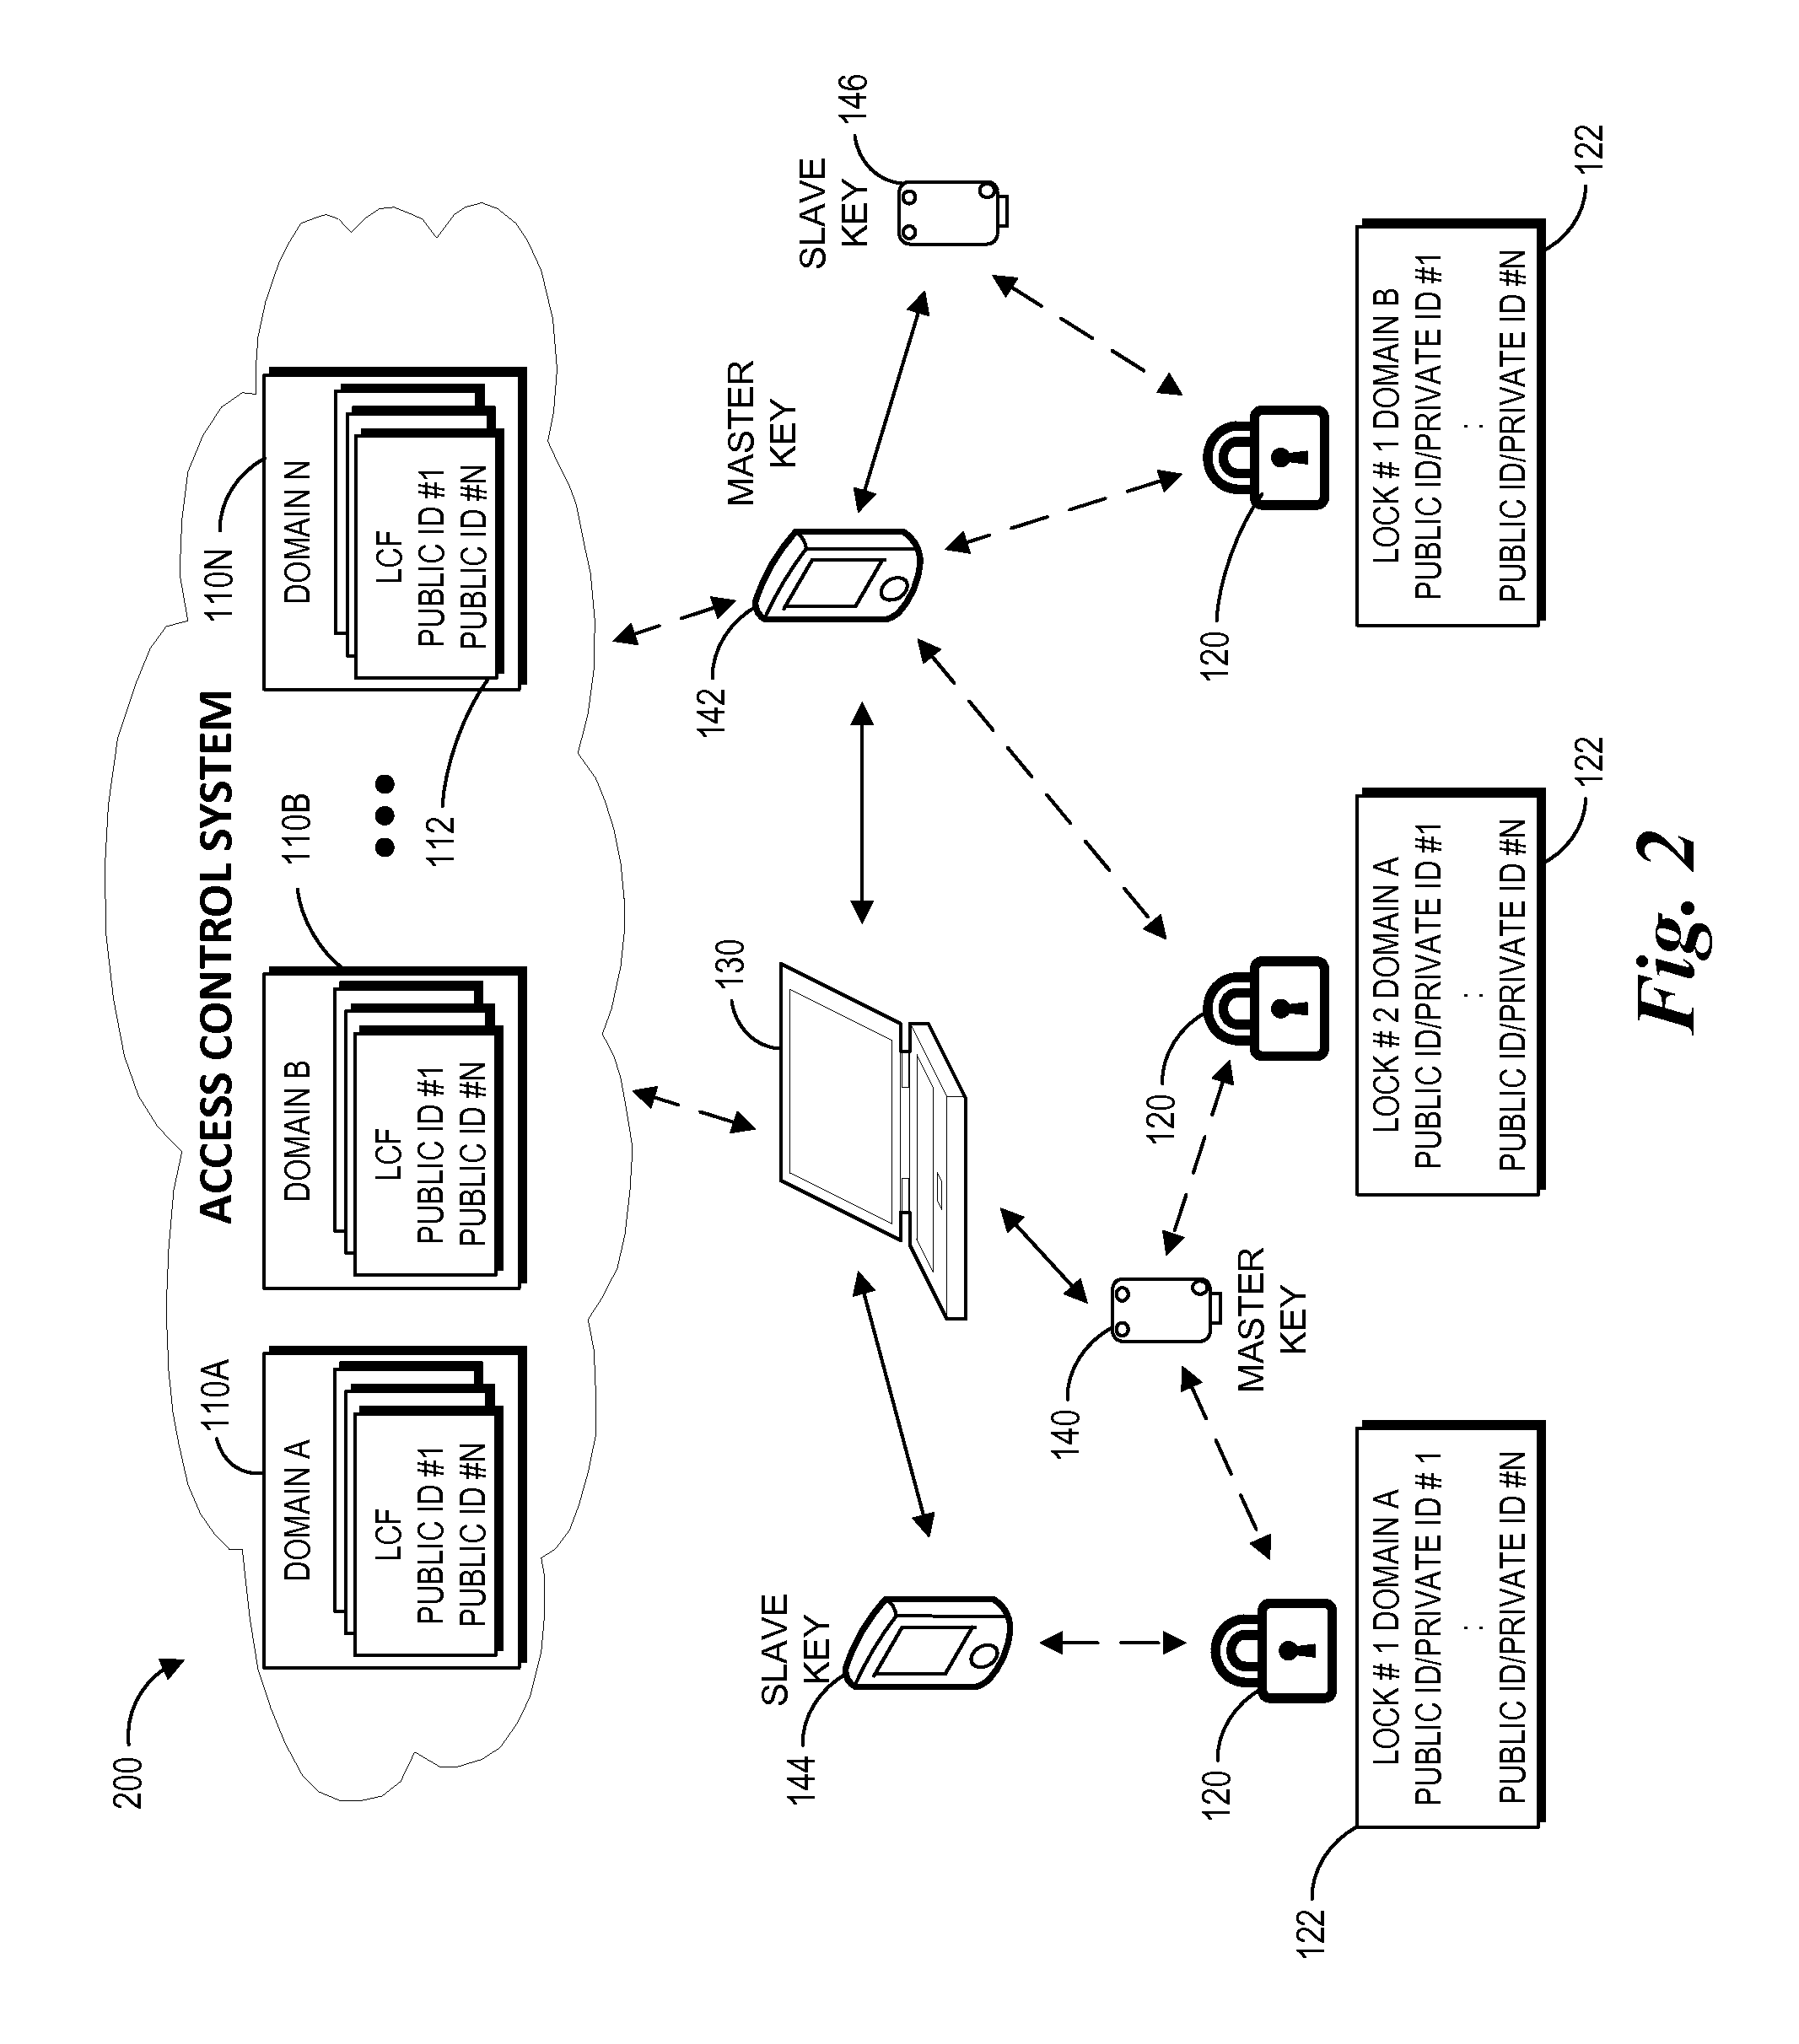 Contactless electronic access control system